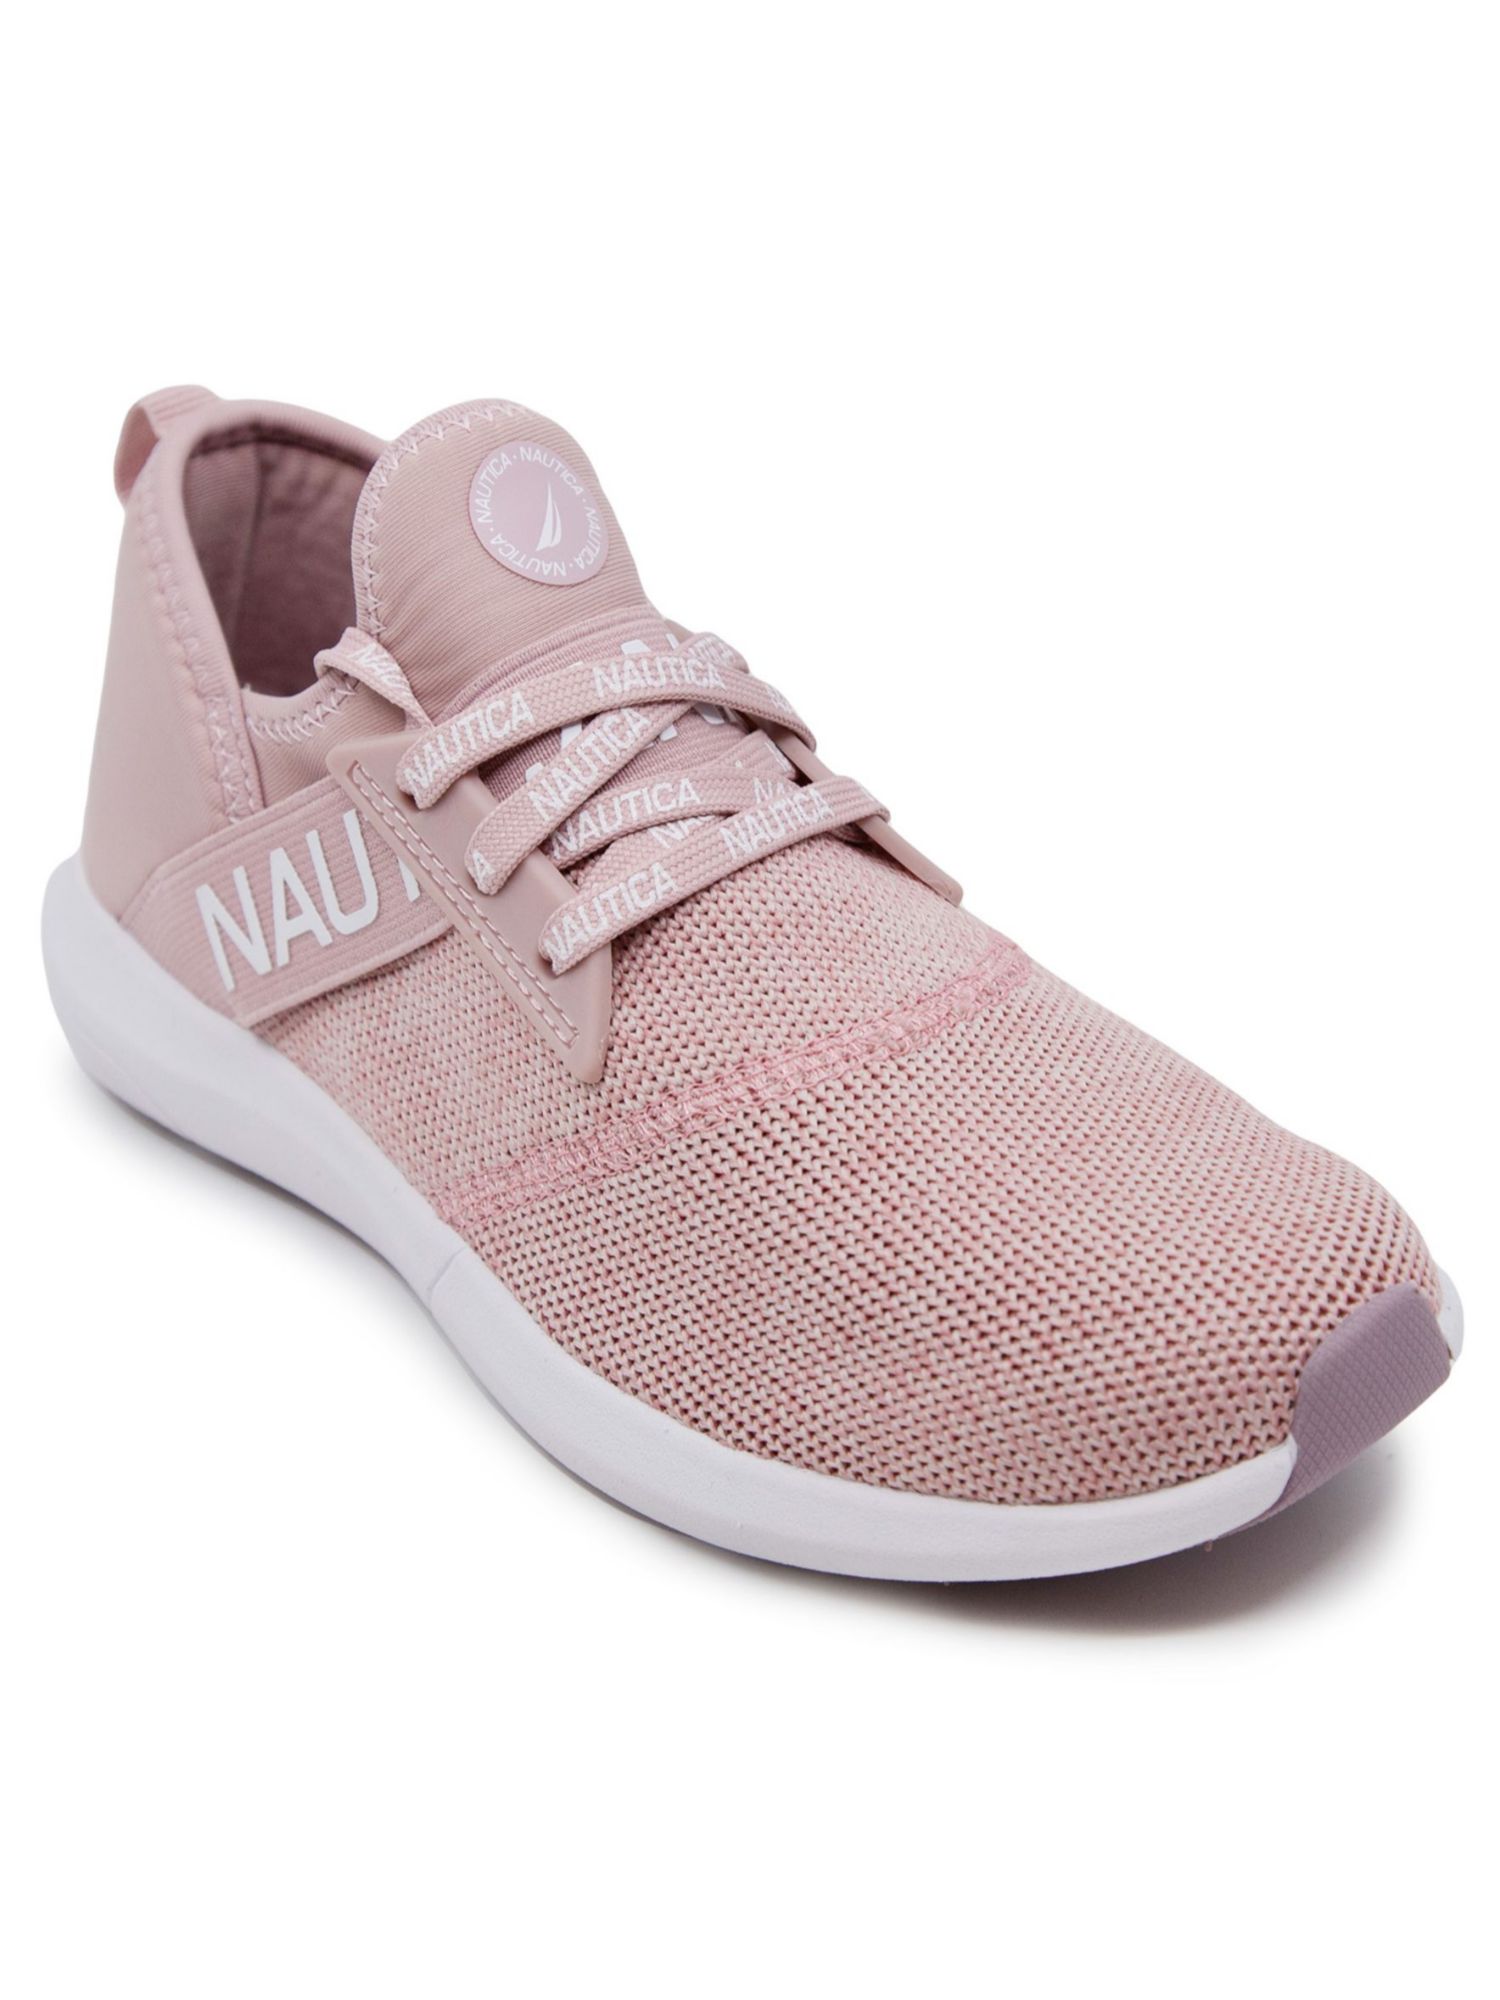 NAUTICA Womens Pink Knit Comfort Beela Round Toe Wedge Lace-Up Athletic Sneakers Shoes 8